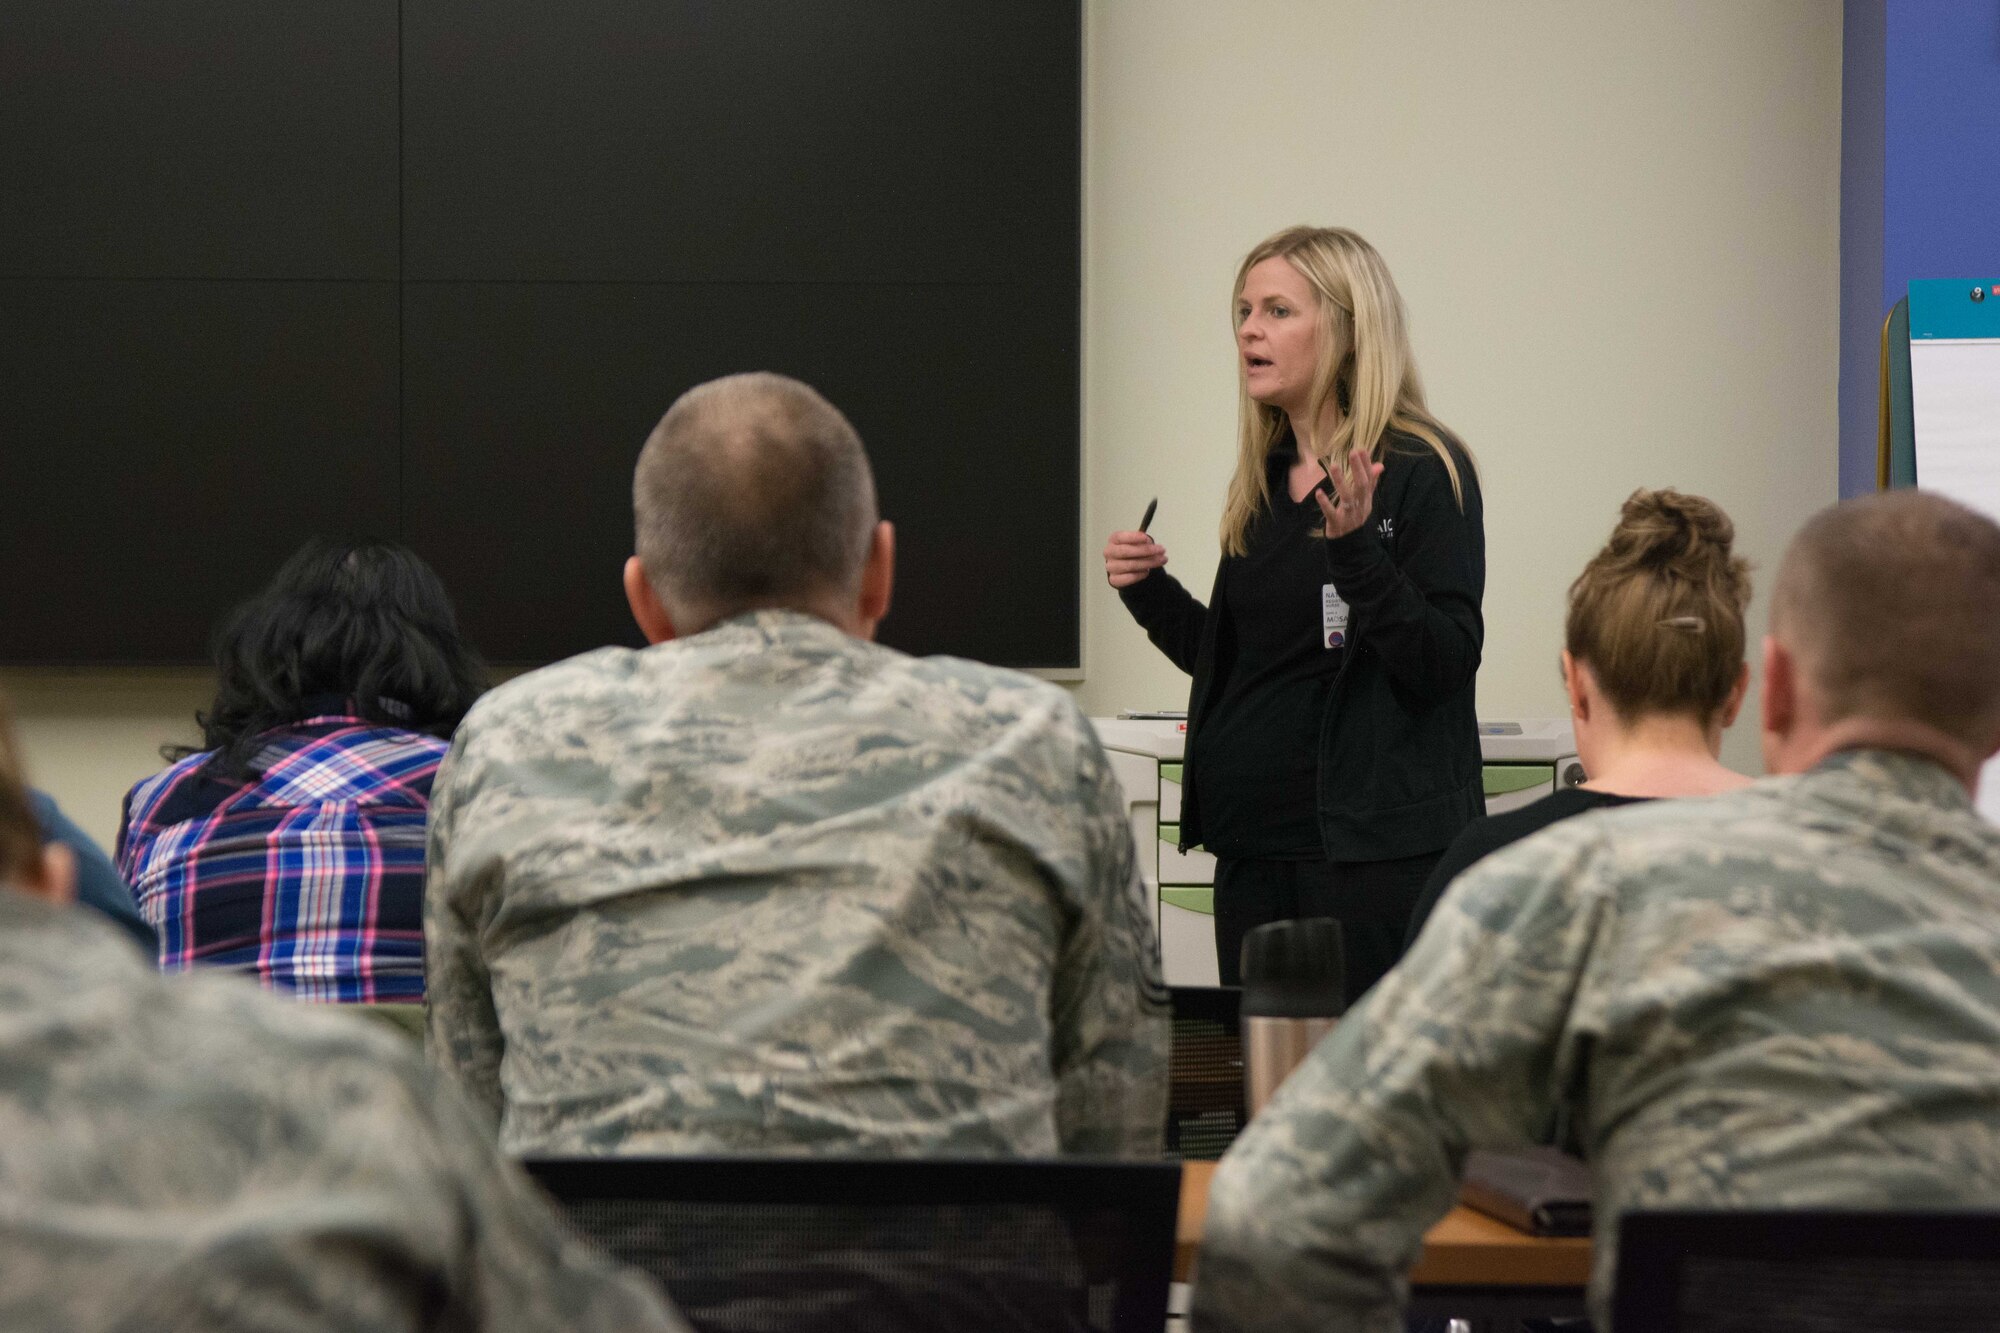 A registered nurse from Mosaic Life Care teaches servicemembers about victim advocacy in St. Joseph, Mo., April 12, 2017. The training is an annual requirement for servicemembers who volunteer to be victim advocates. Airmen from Whiteman Air Force Base, Kansas Air National Guard’s 190th Air Refueling Wing, Missouri ANG’s 139th Airlift Wing and 131st Bomb Wing, and sailors from the Naval Operational Support Center in Kansas City attended the training. (U.S. Air National Guard photo by Master Sgt. Michael Crane)